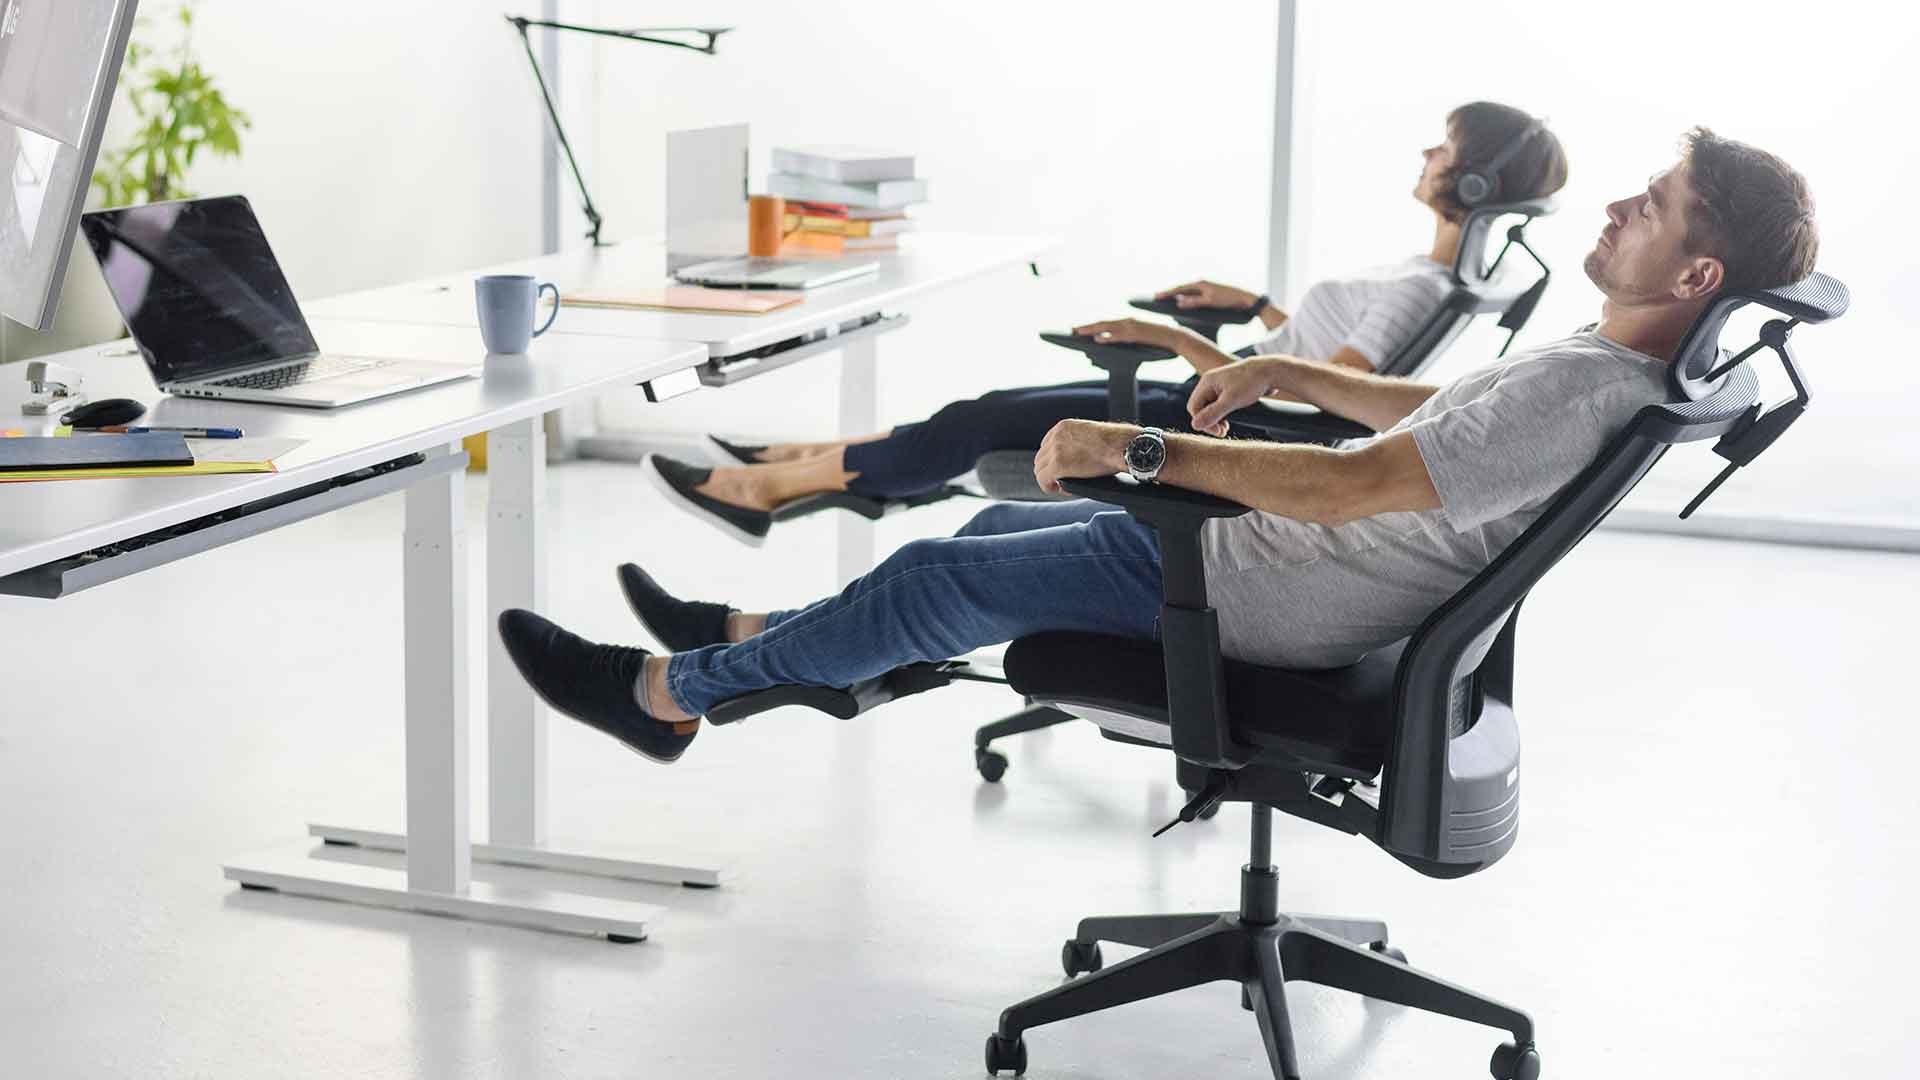 5 Best office chairs for back pain in 2020